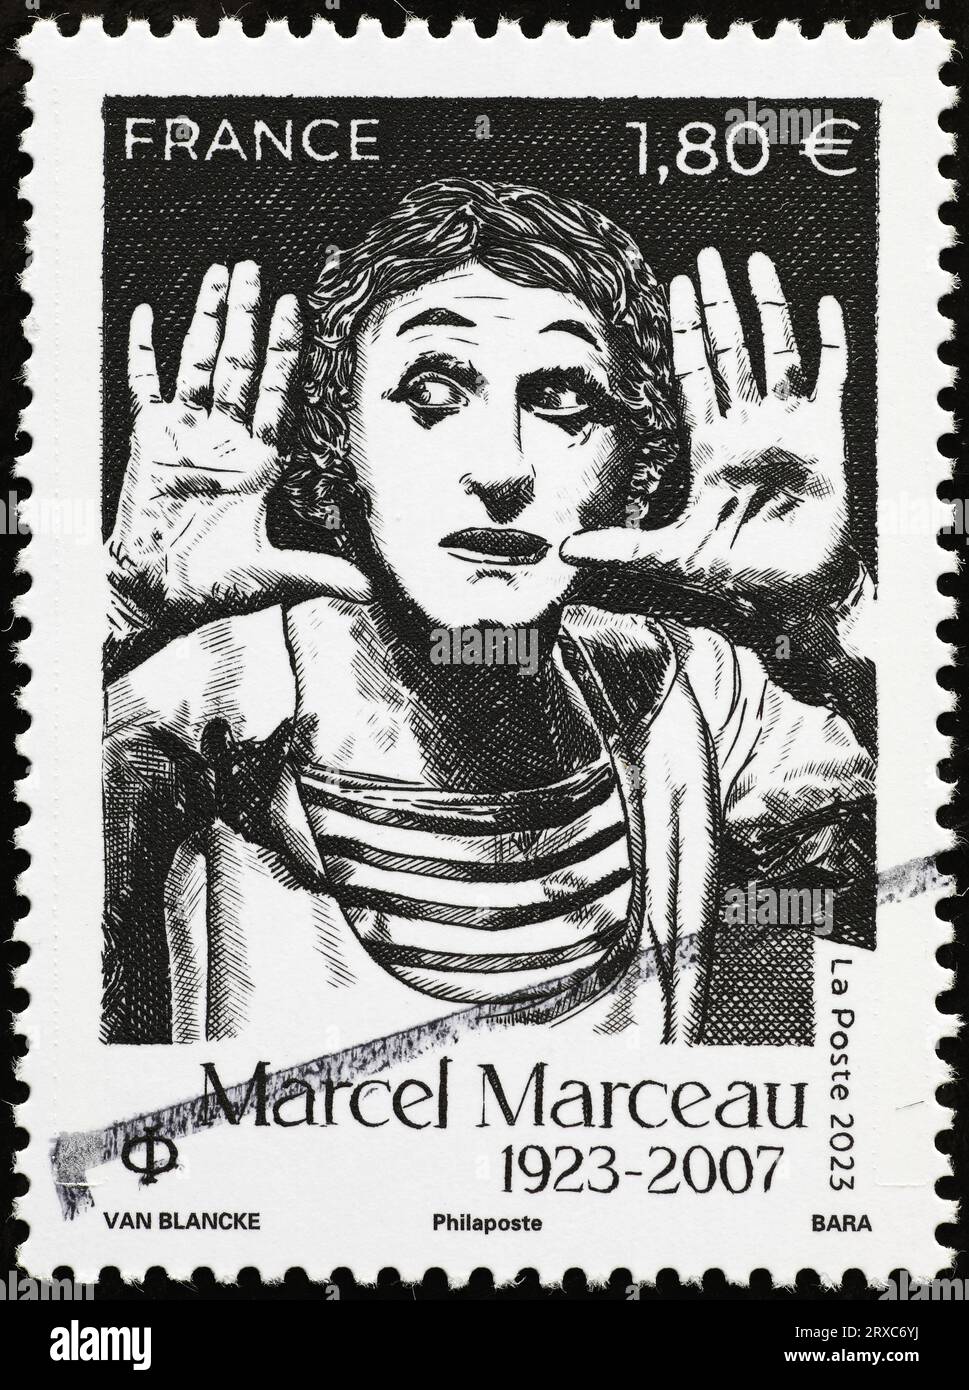 Mime artist Marcel Marceau on french postage stamp Stock Photo